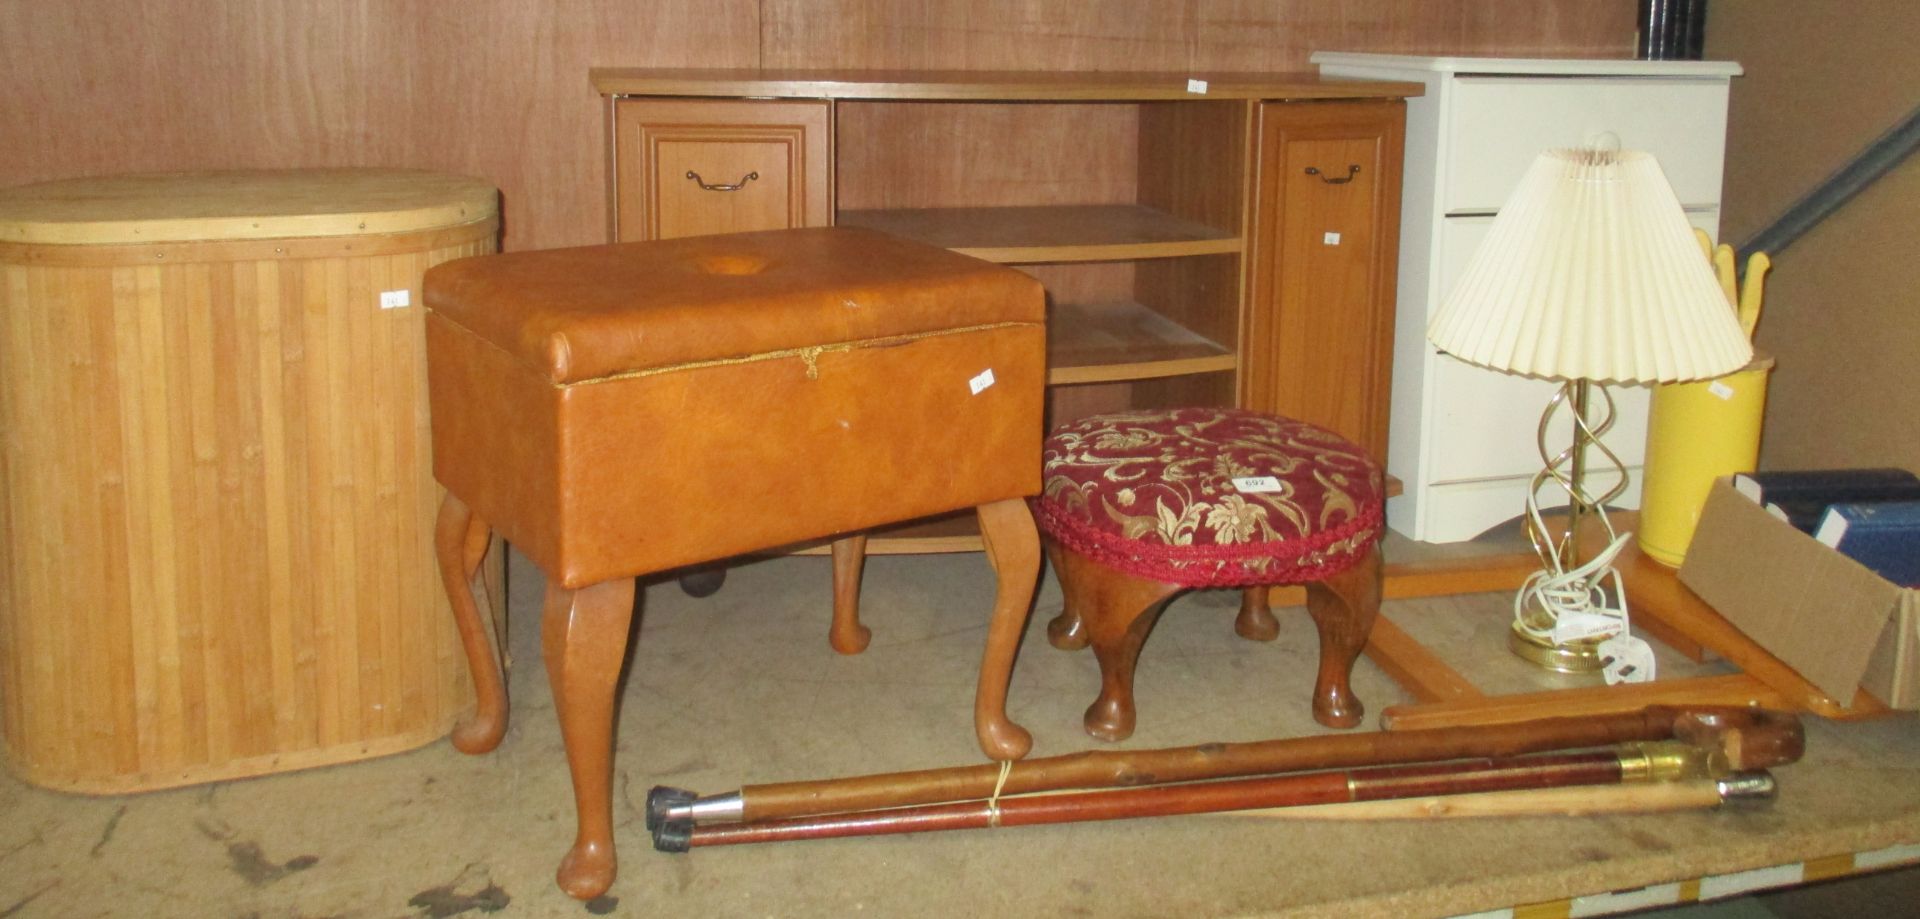 Contents to corner of rack linen box, upholstered sewing box, TV cabinet, stool,